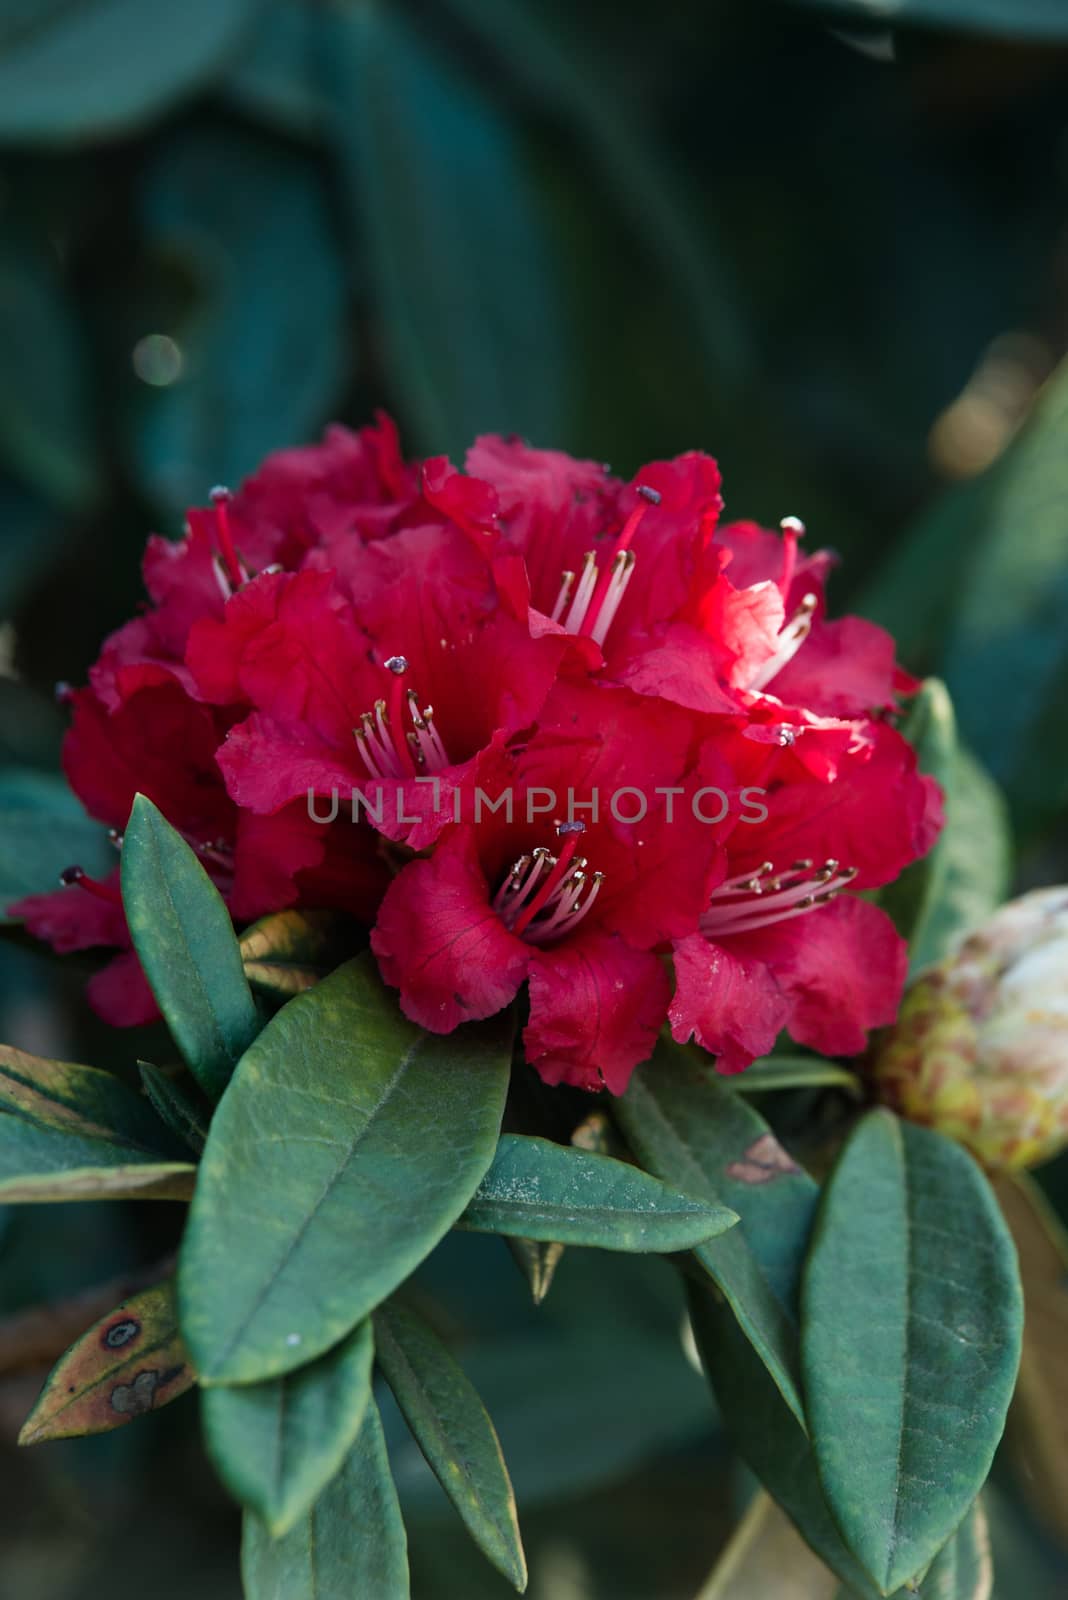 Rhododendron arboreum (Azalea) in doi inthanon national park, Th by jakgree